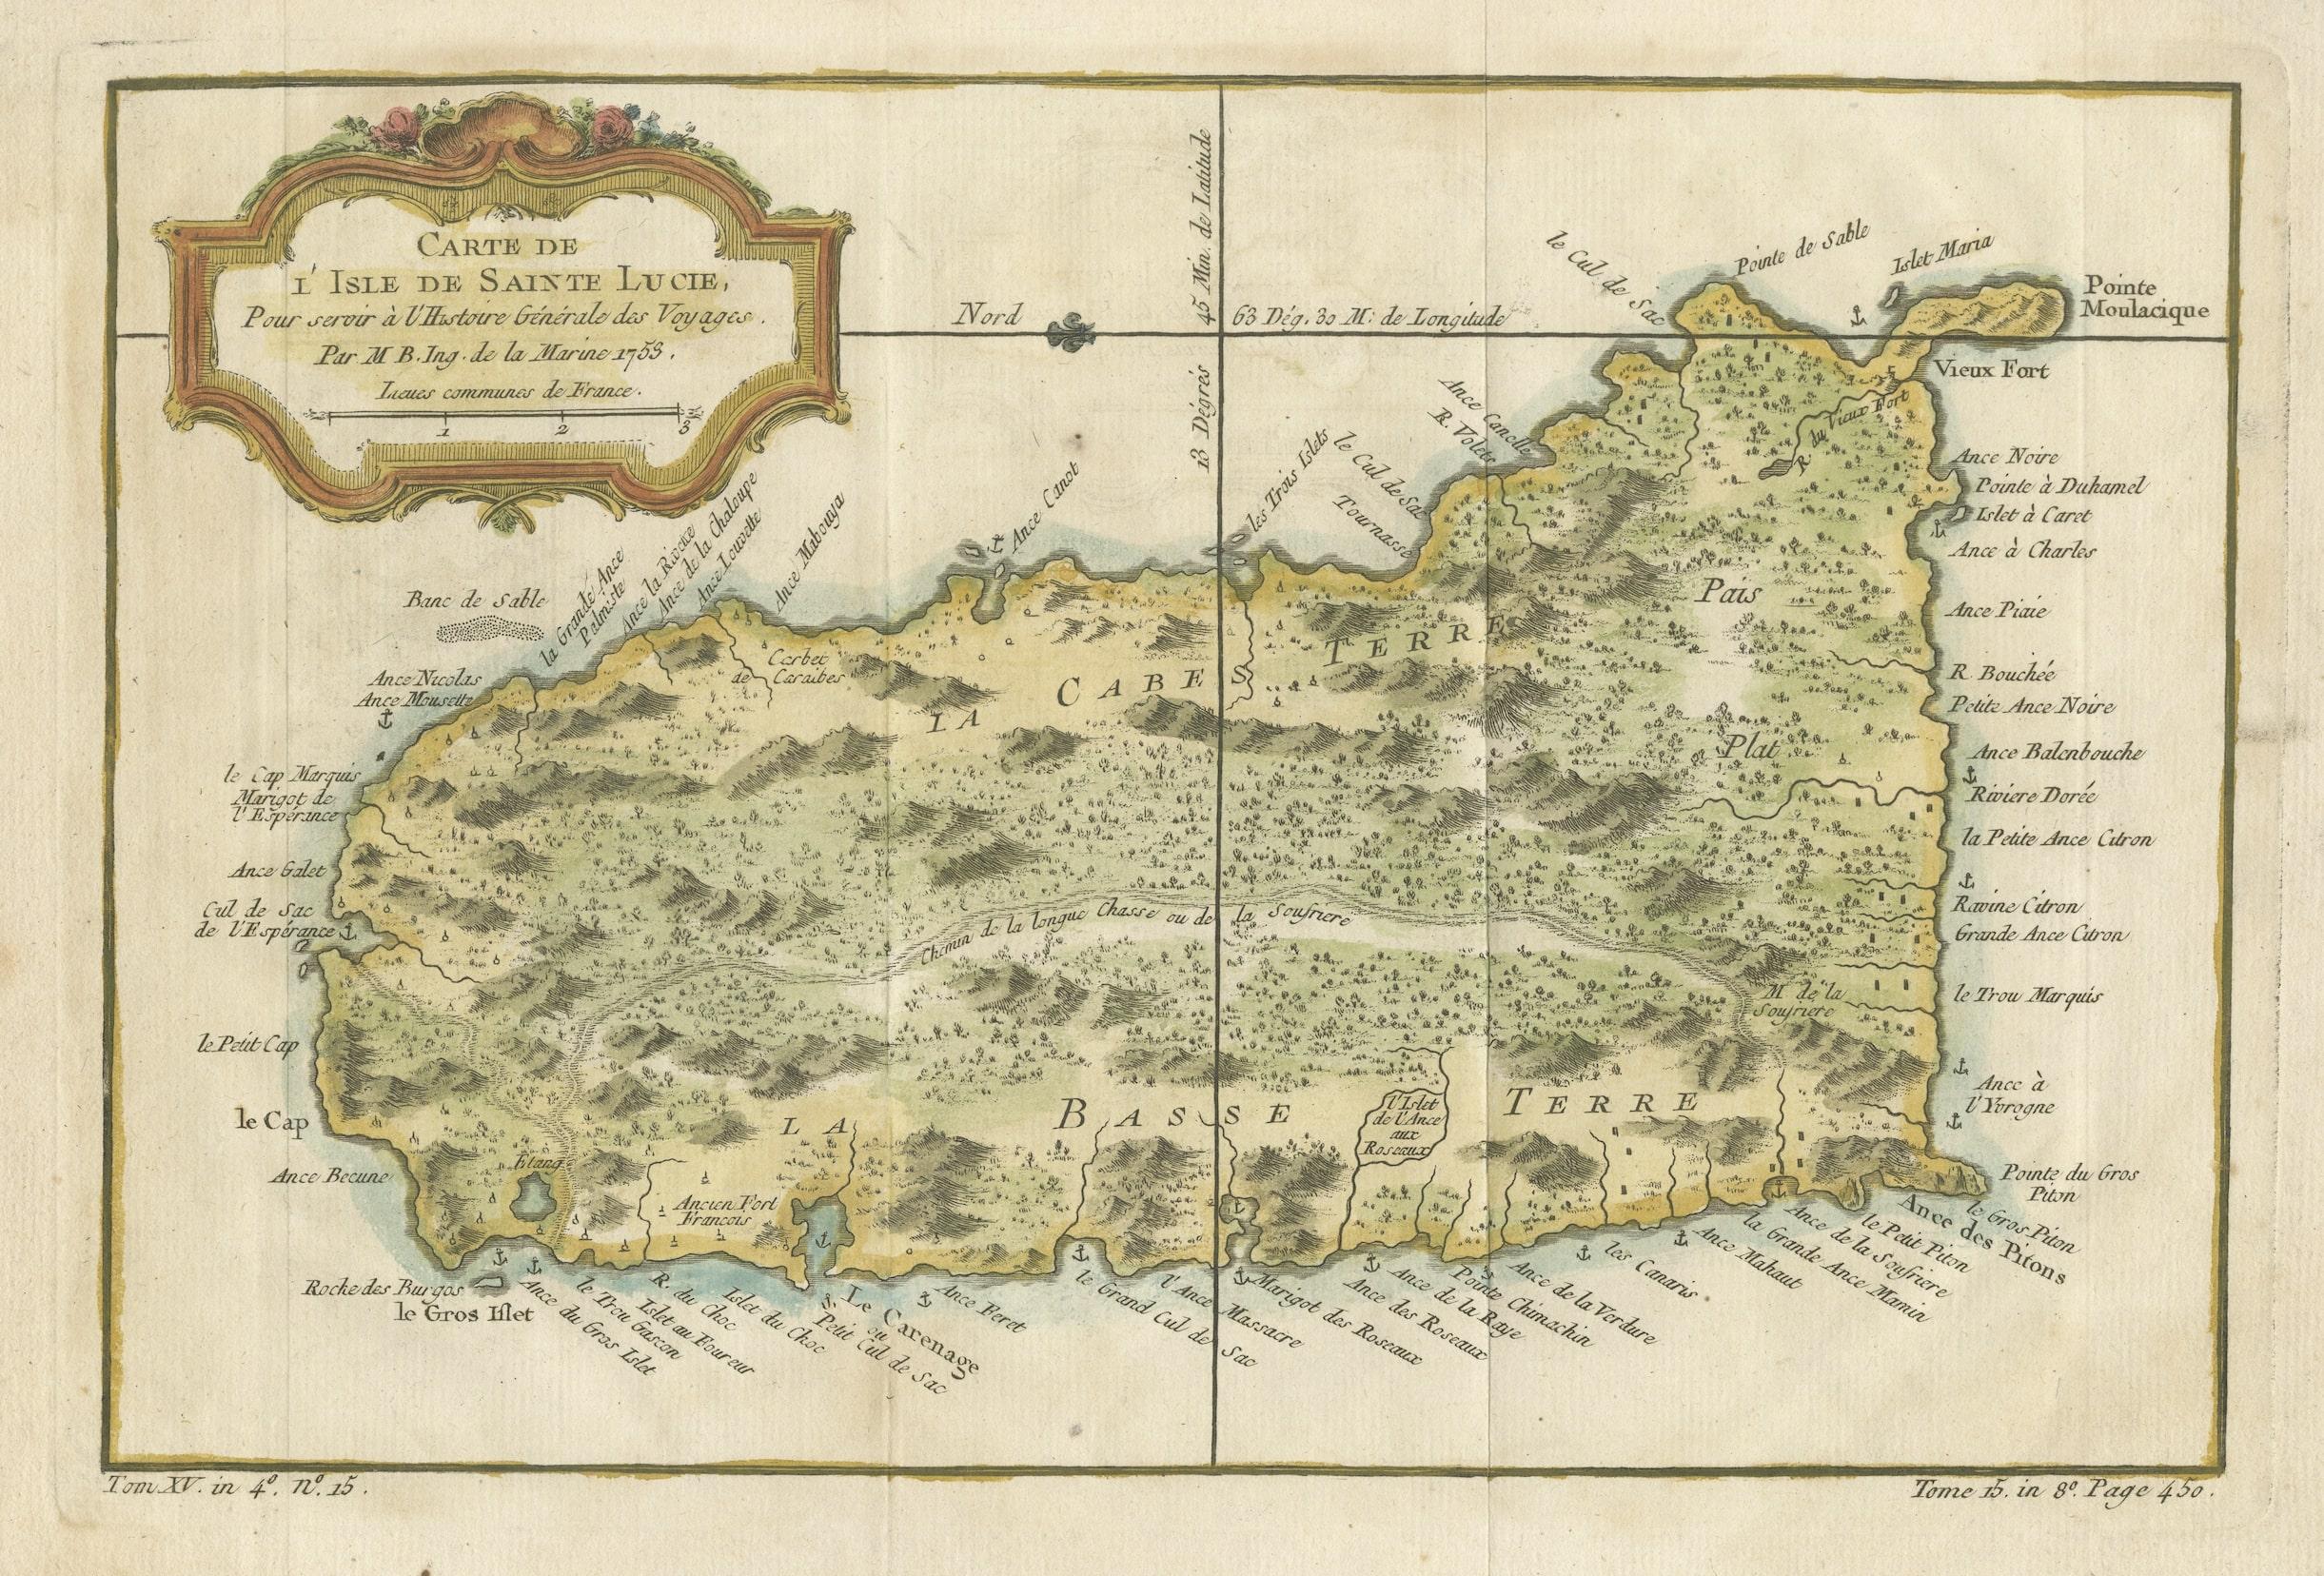 Engraved Map by Bellin of Saint Lucia or Sainte Lucie in the West Indies, 1764 3